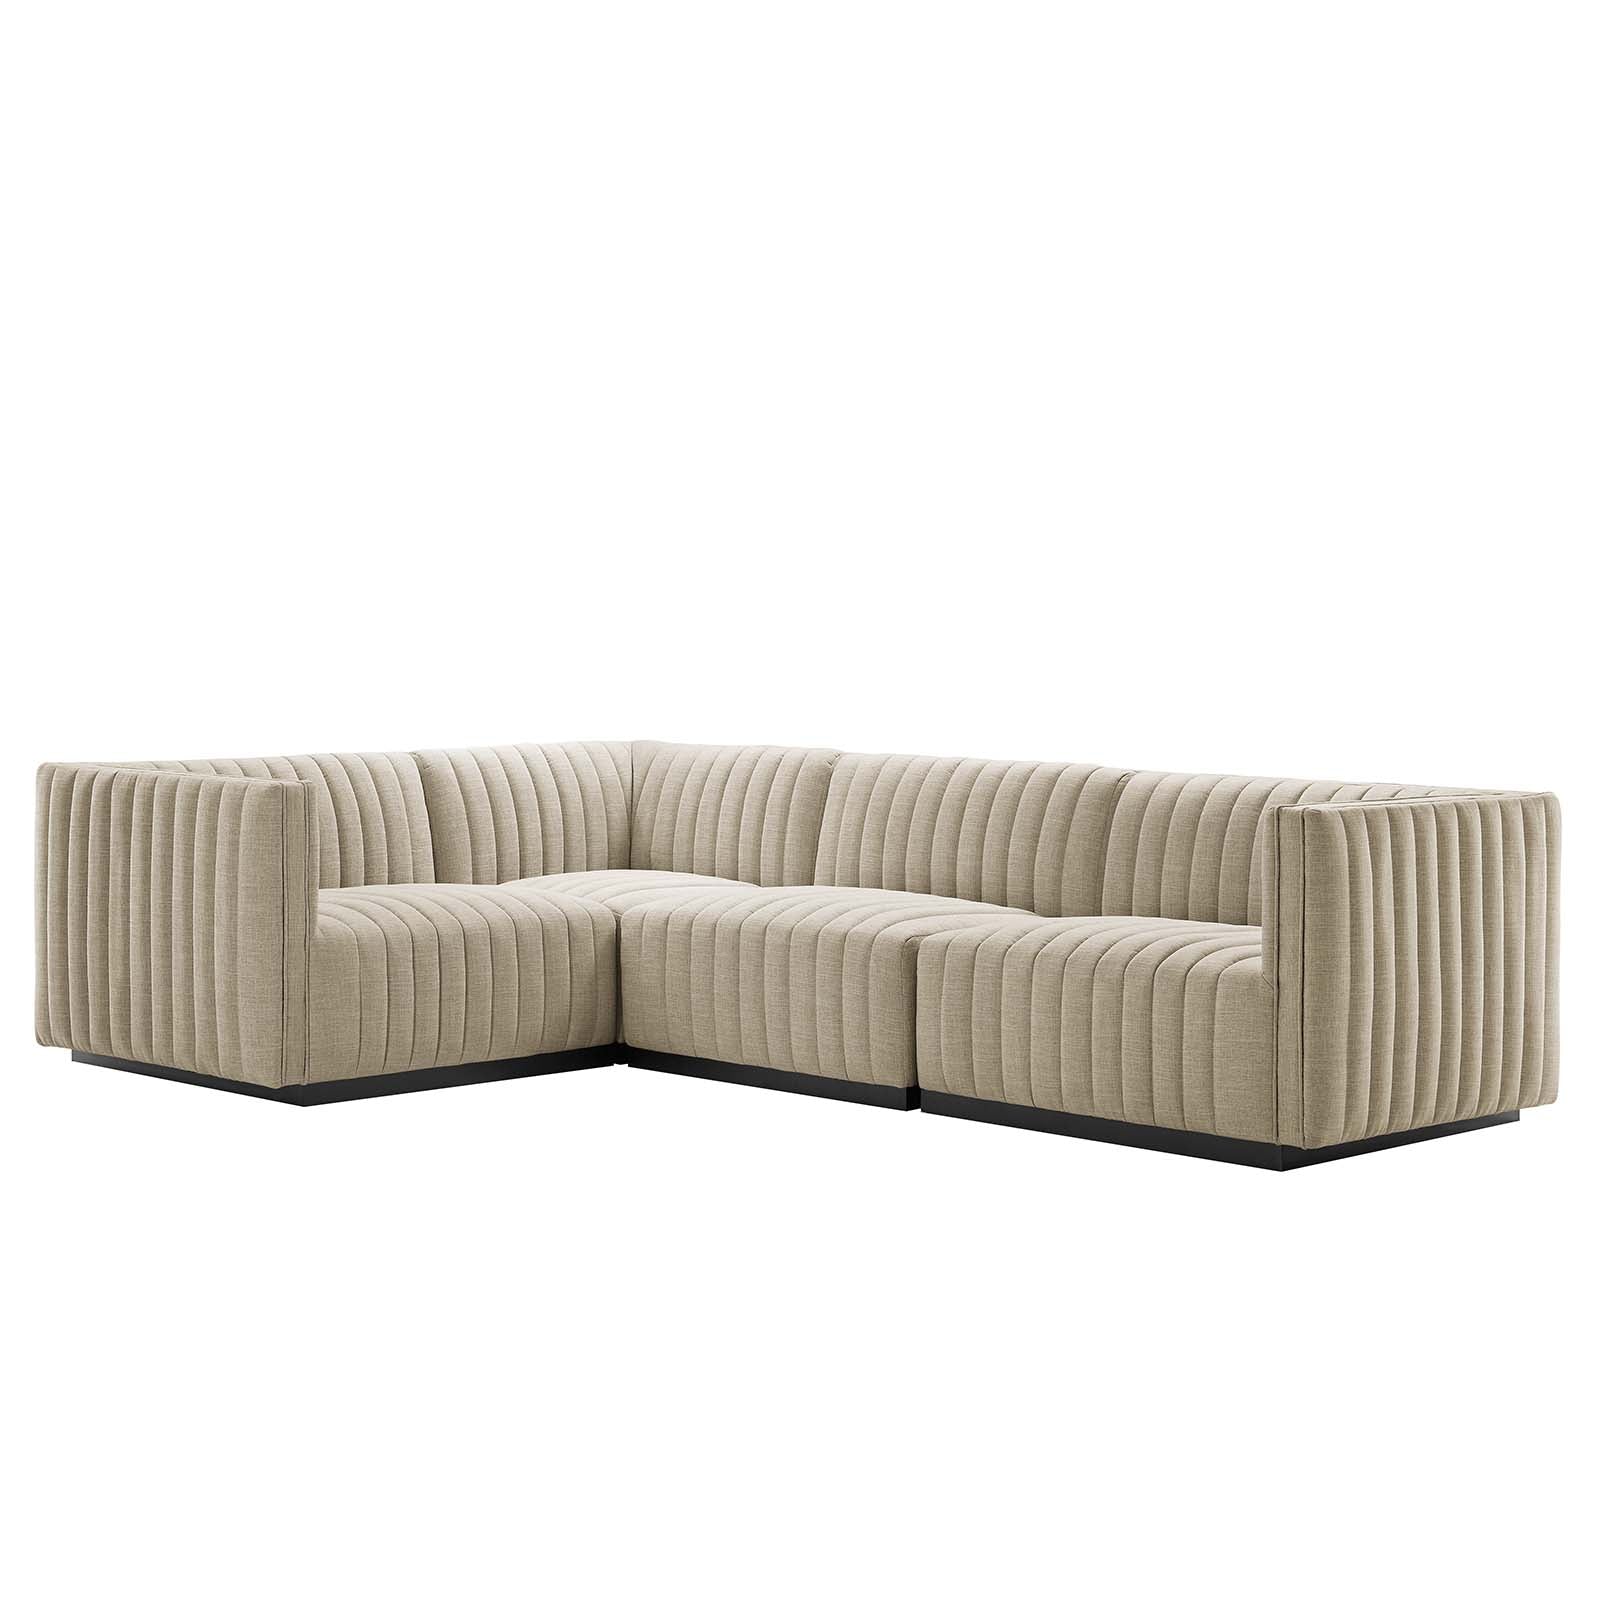 Modway Sectional Sofas - Conjure Channel Tufted 73 " W Upholstered Fabric 4-Piece L-Shaped Sectional Black Beige